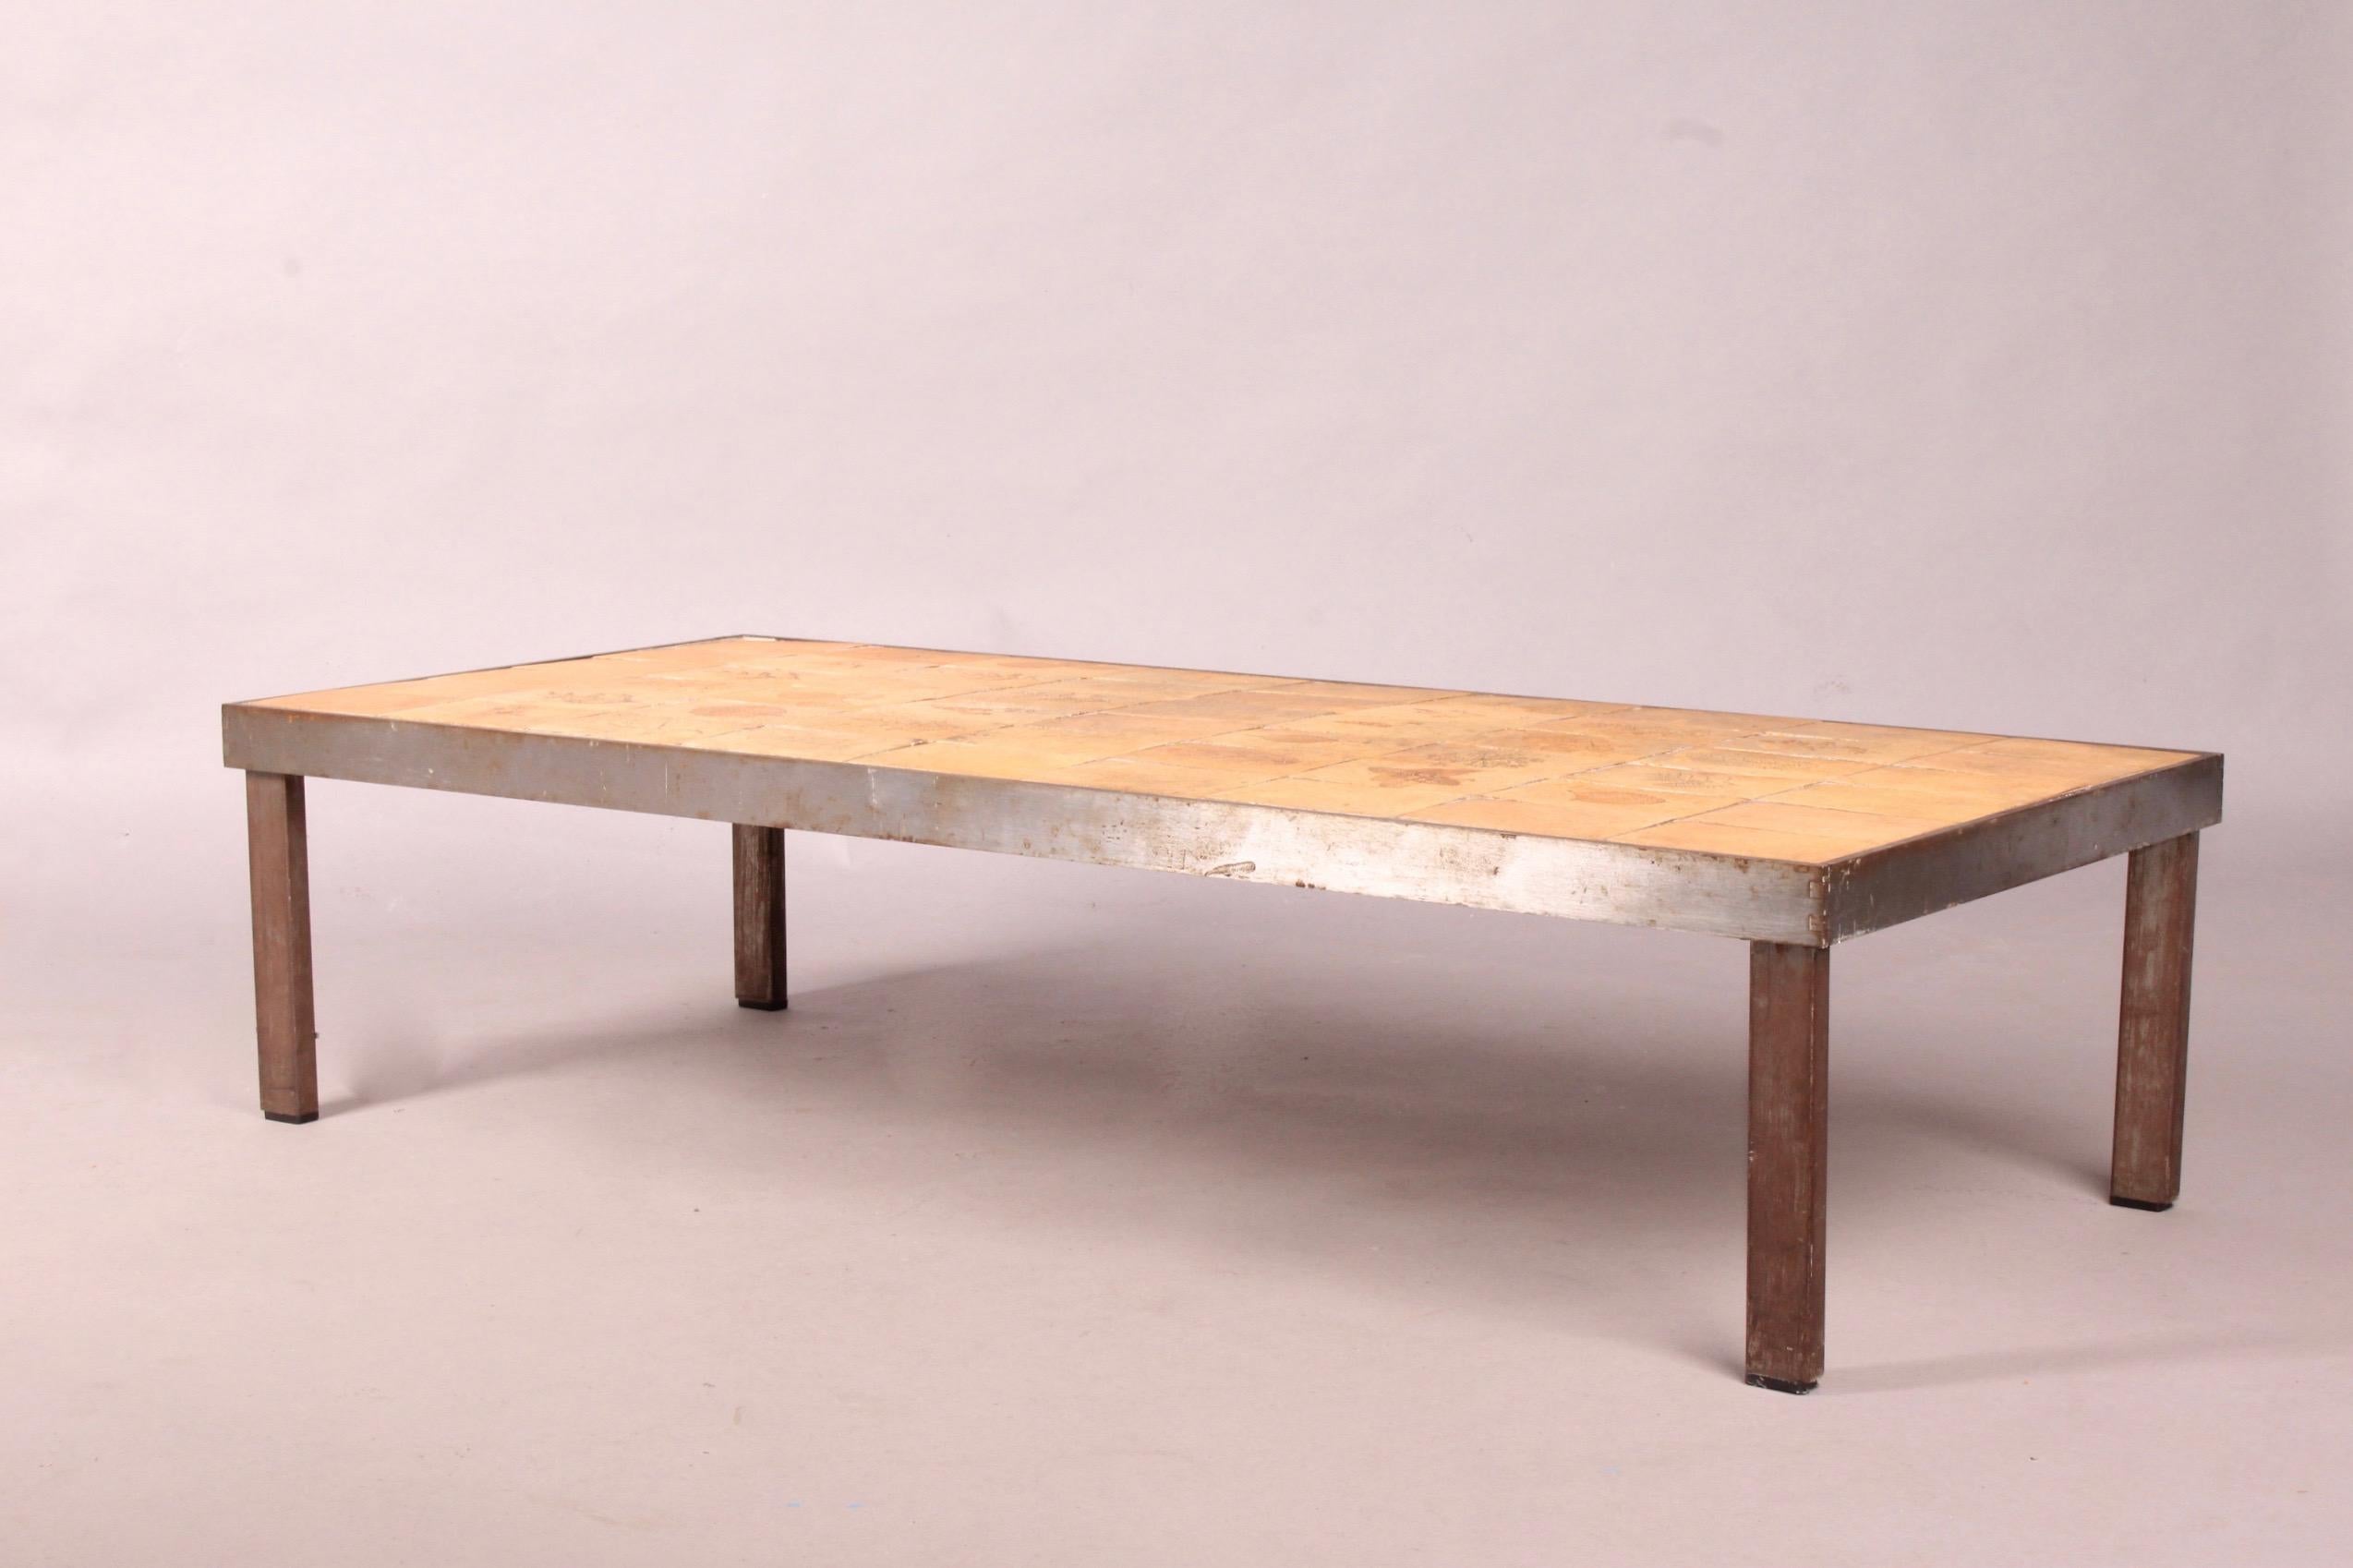 Ceramic and metal Roger Capron low table.